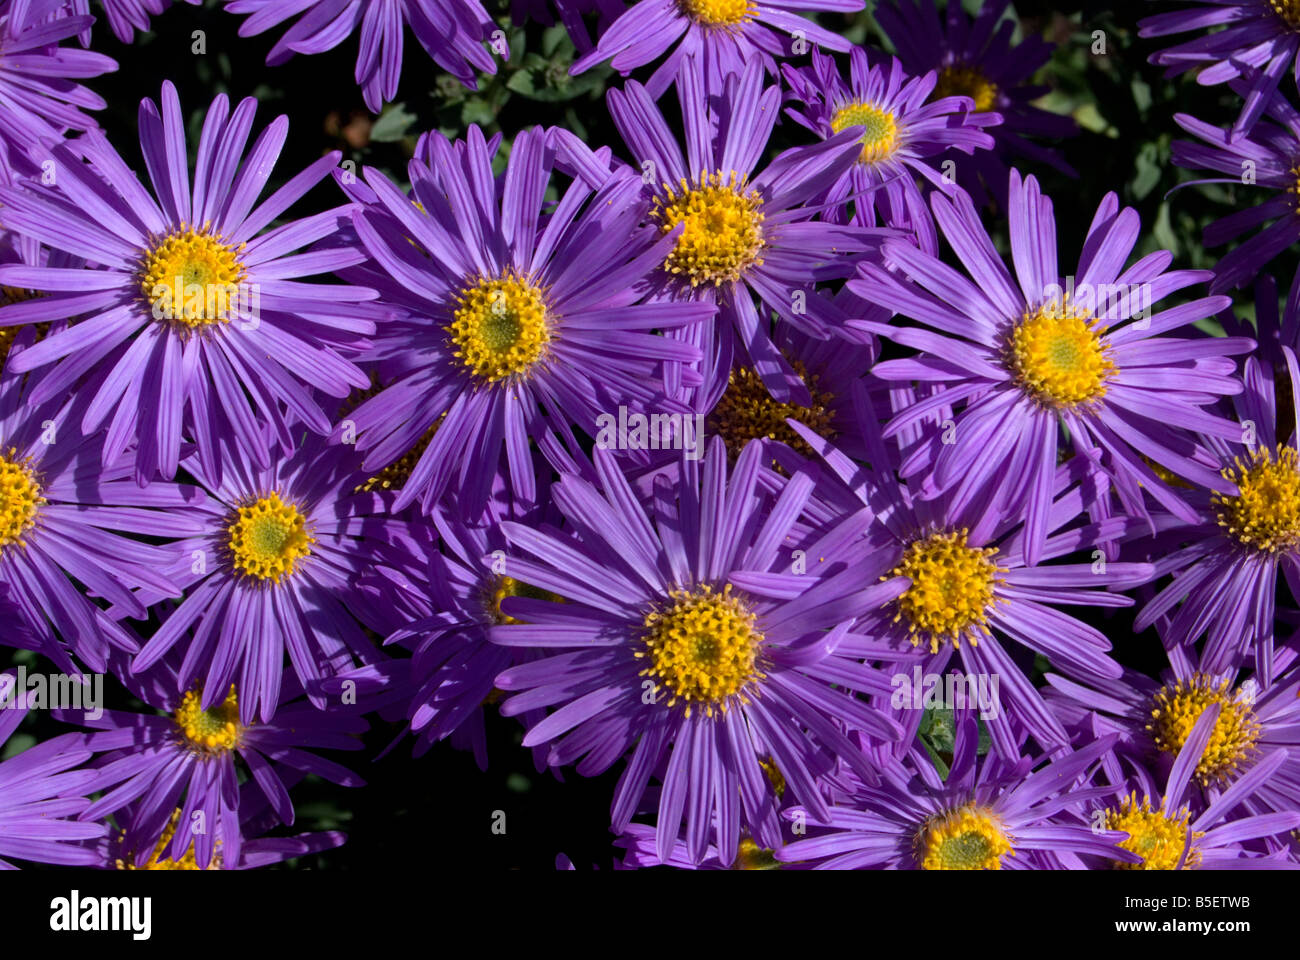 Aster amellus 'King George'. Michaelmas Daisy Banque D'Images